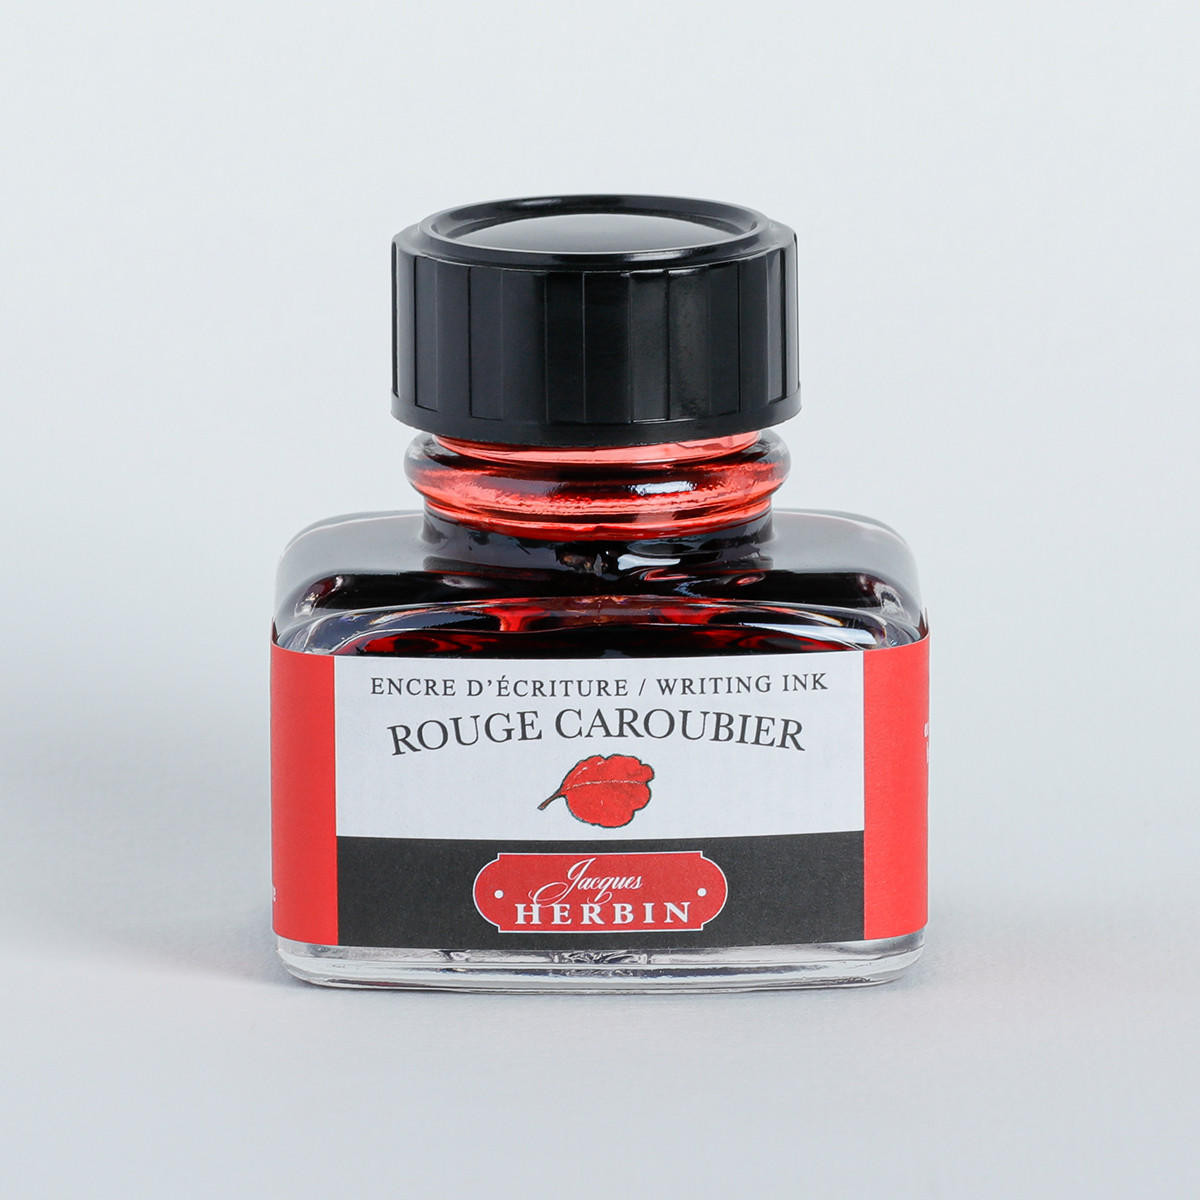 Herbin ’D’ Writing and Drawing Ink 30ml Rouge Caroubier